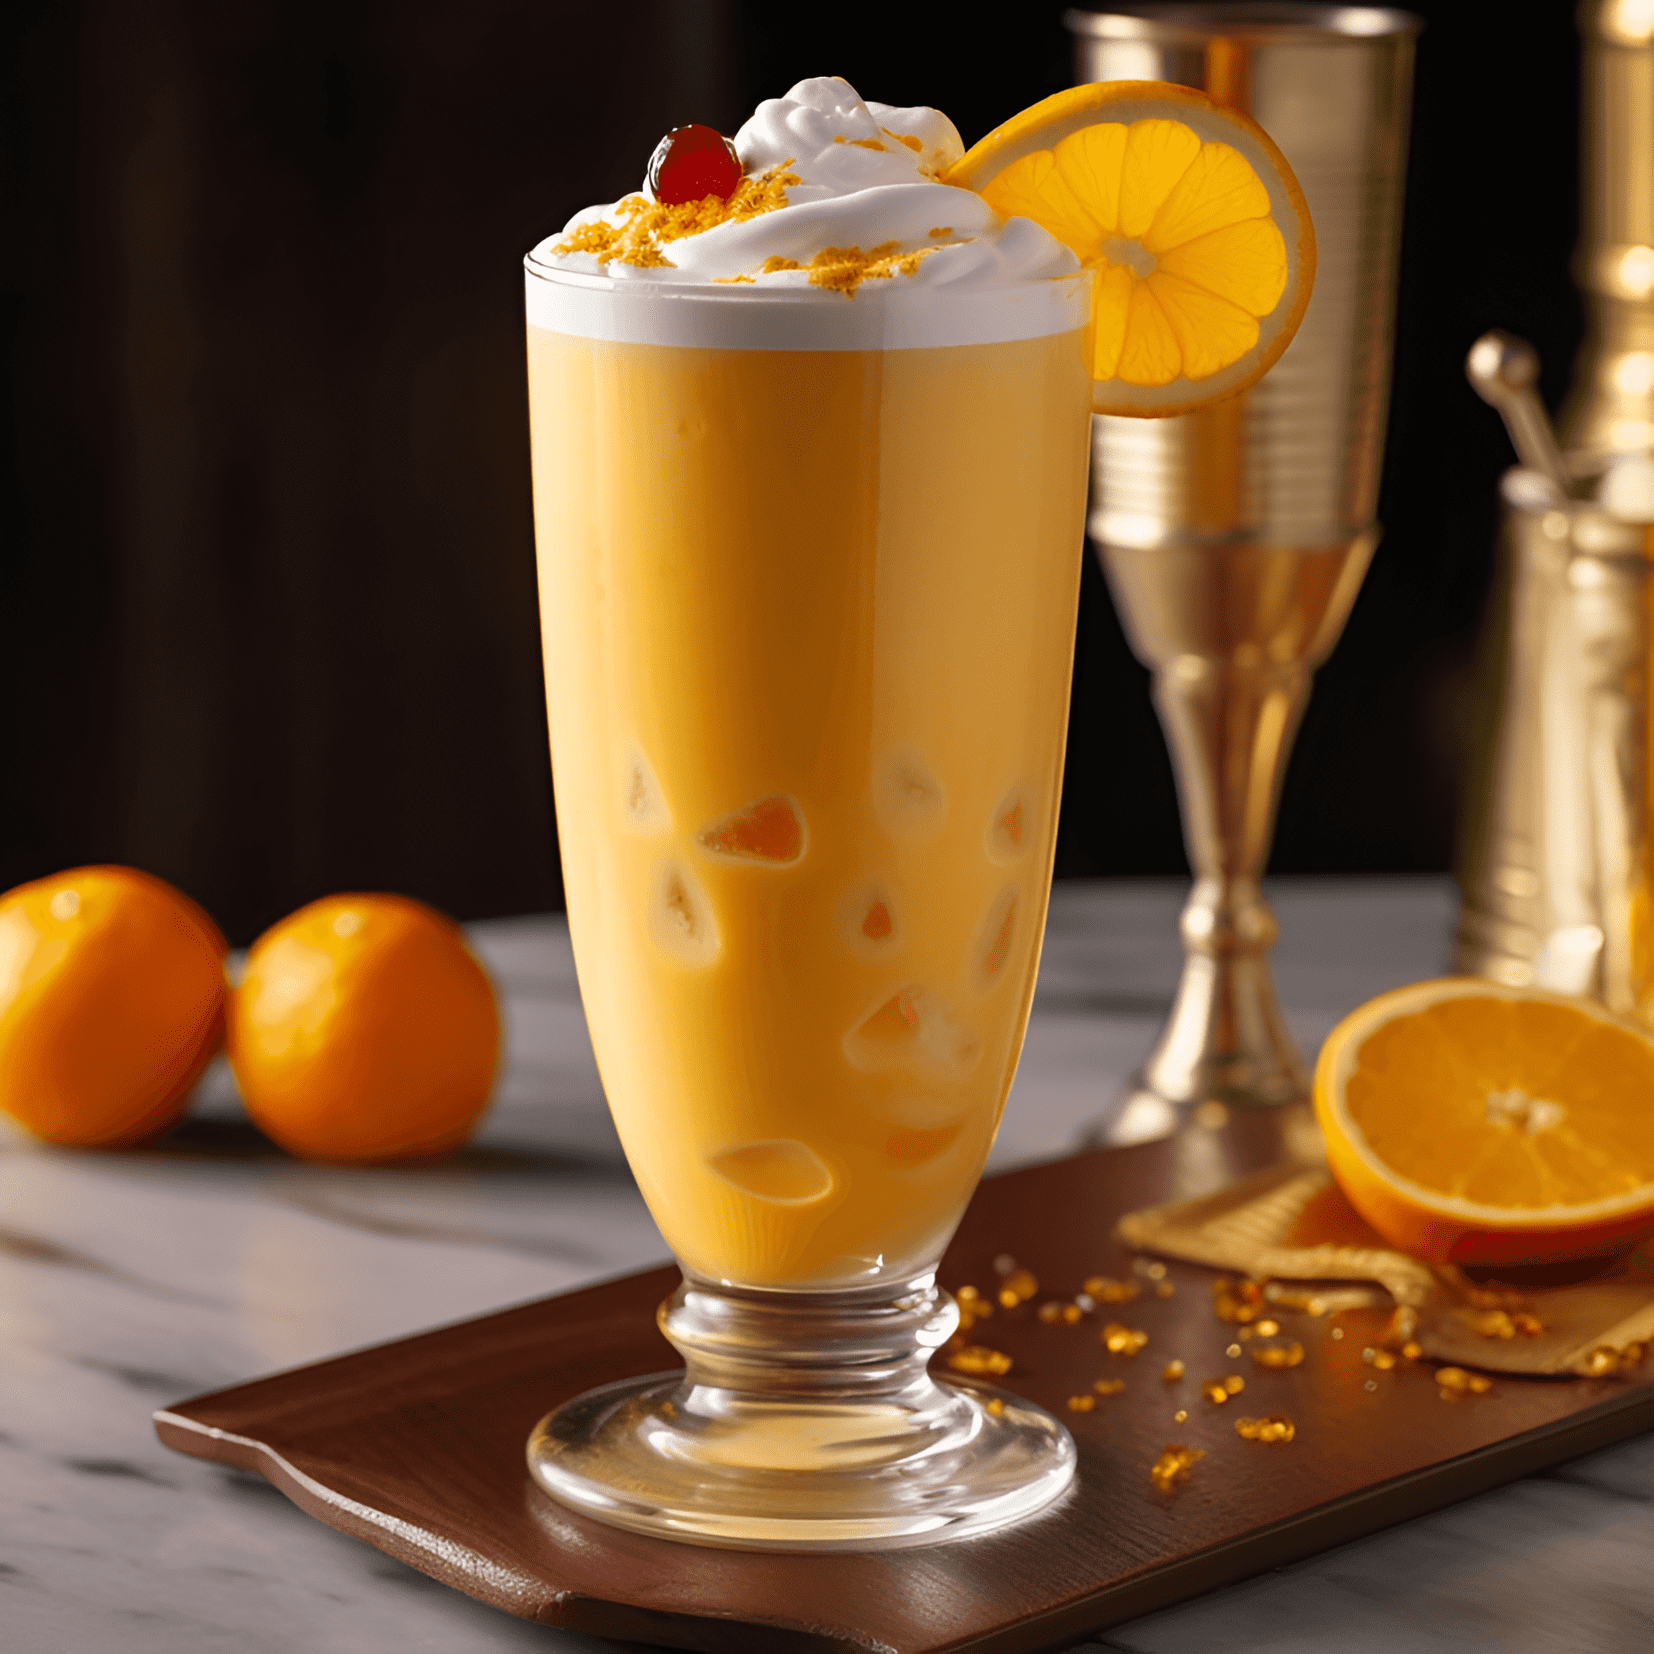 Orange Julius Cocktail Recipe - The Orange Julius cocktail has a sweet, tangy, and creamy taste with a hint of vanilla. It is light and refreshing, making it perfect for a warm summer day or as a dessert drink.